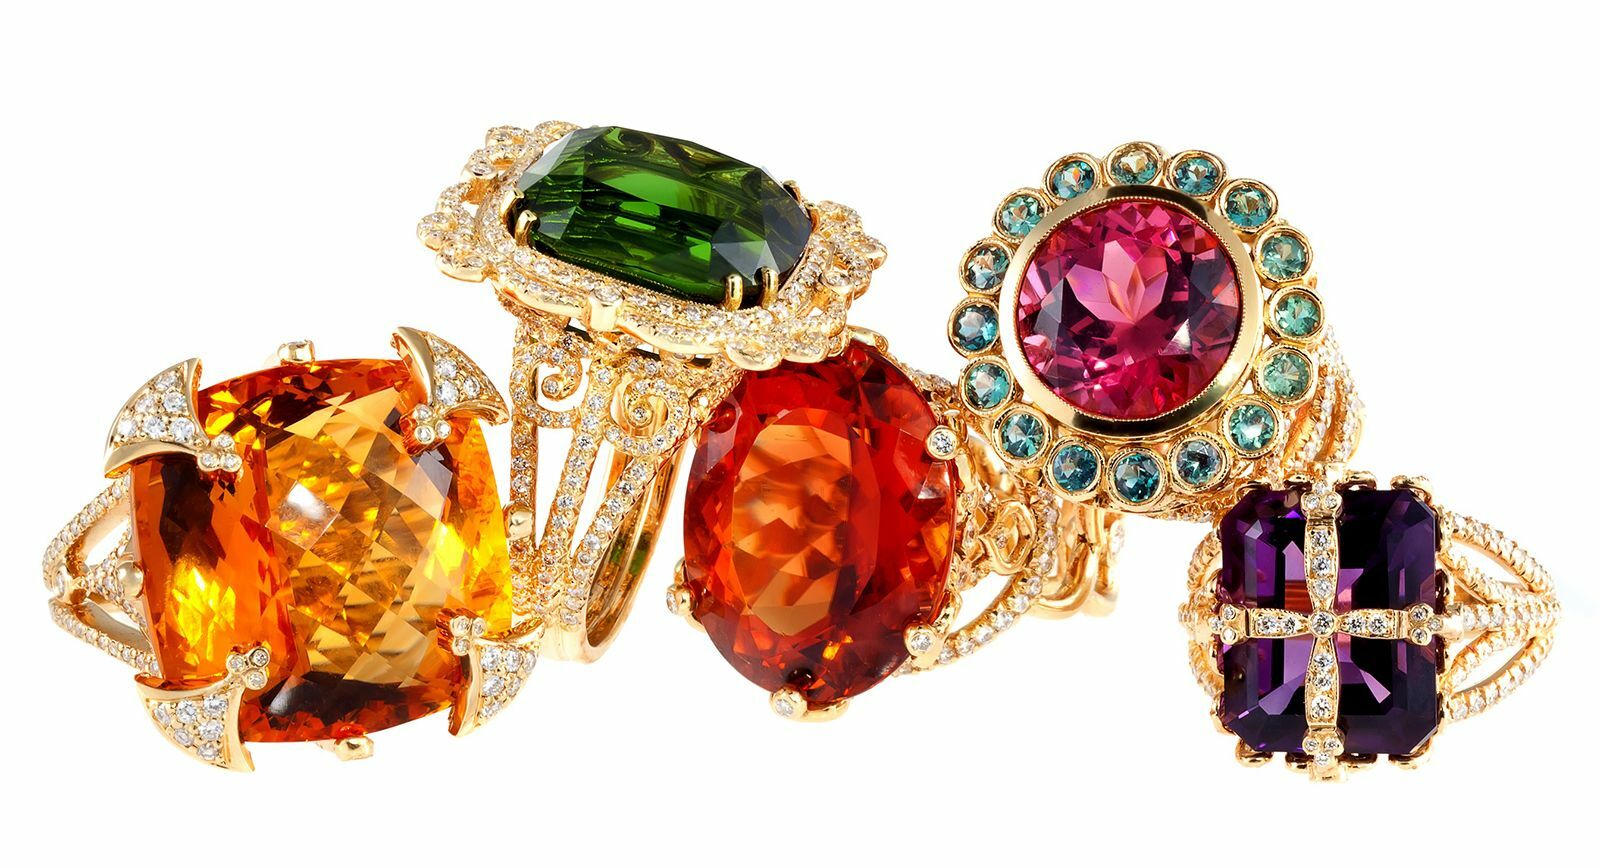 Drop Dead Gorgeous Jewels By Erica Courtney